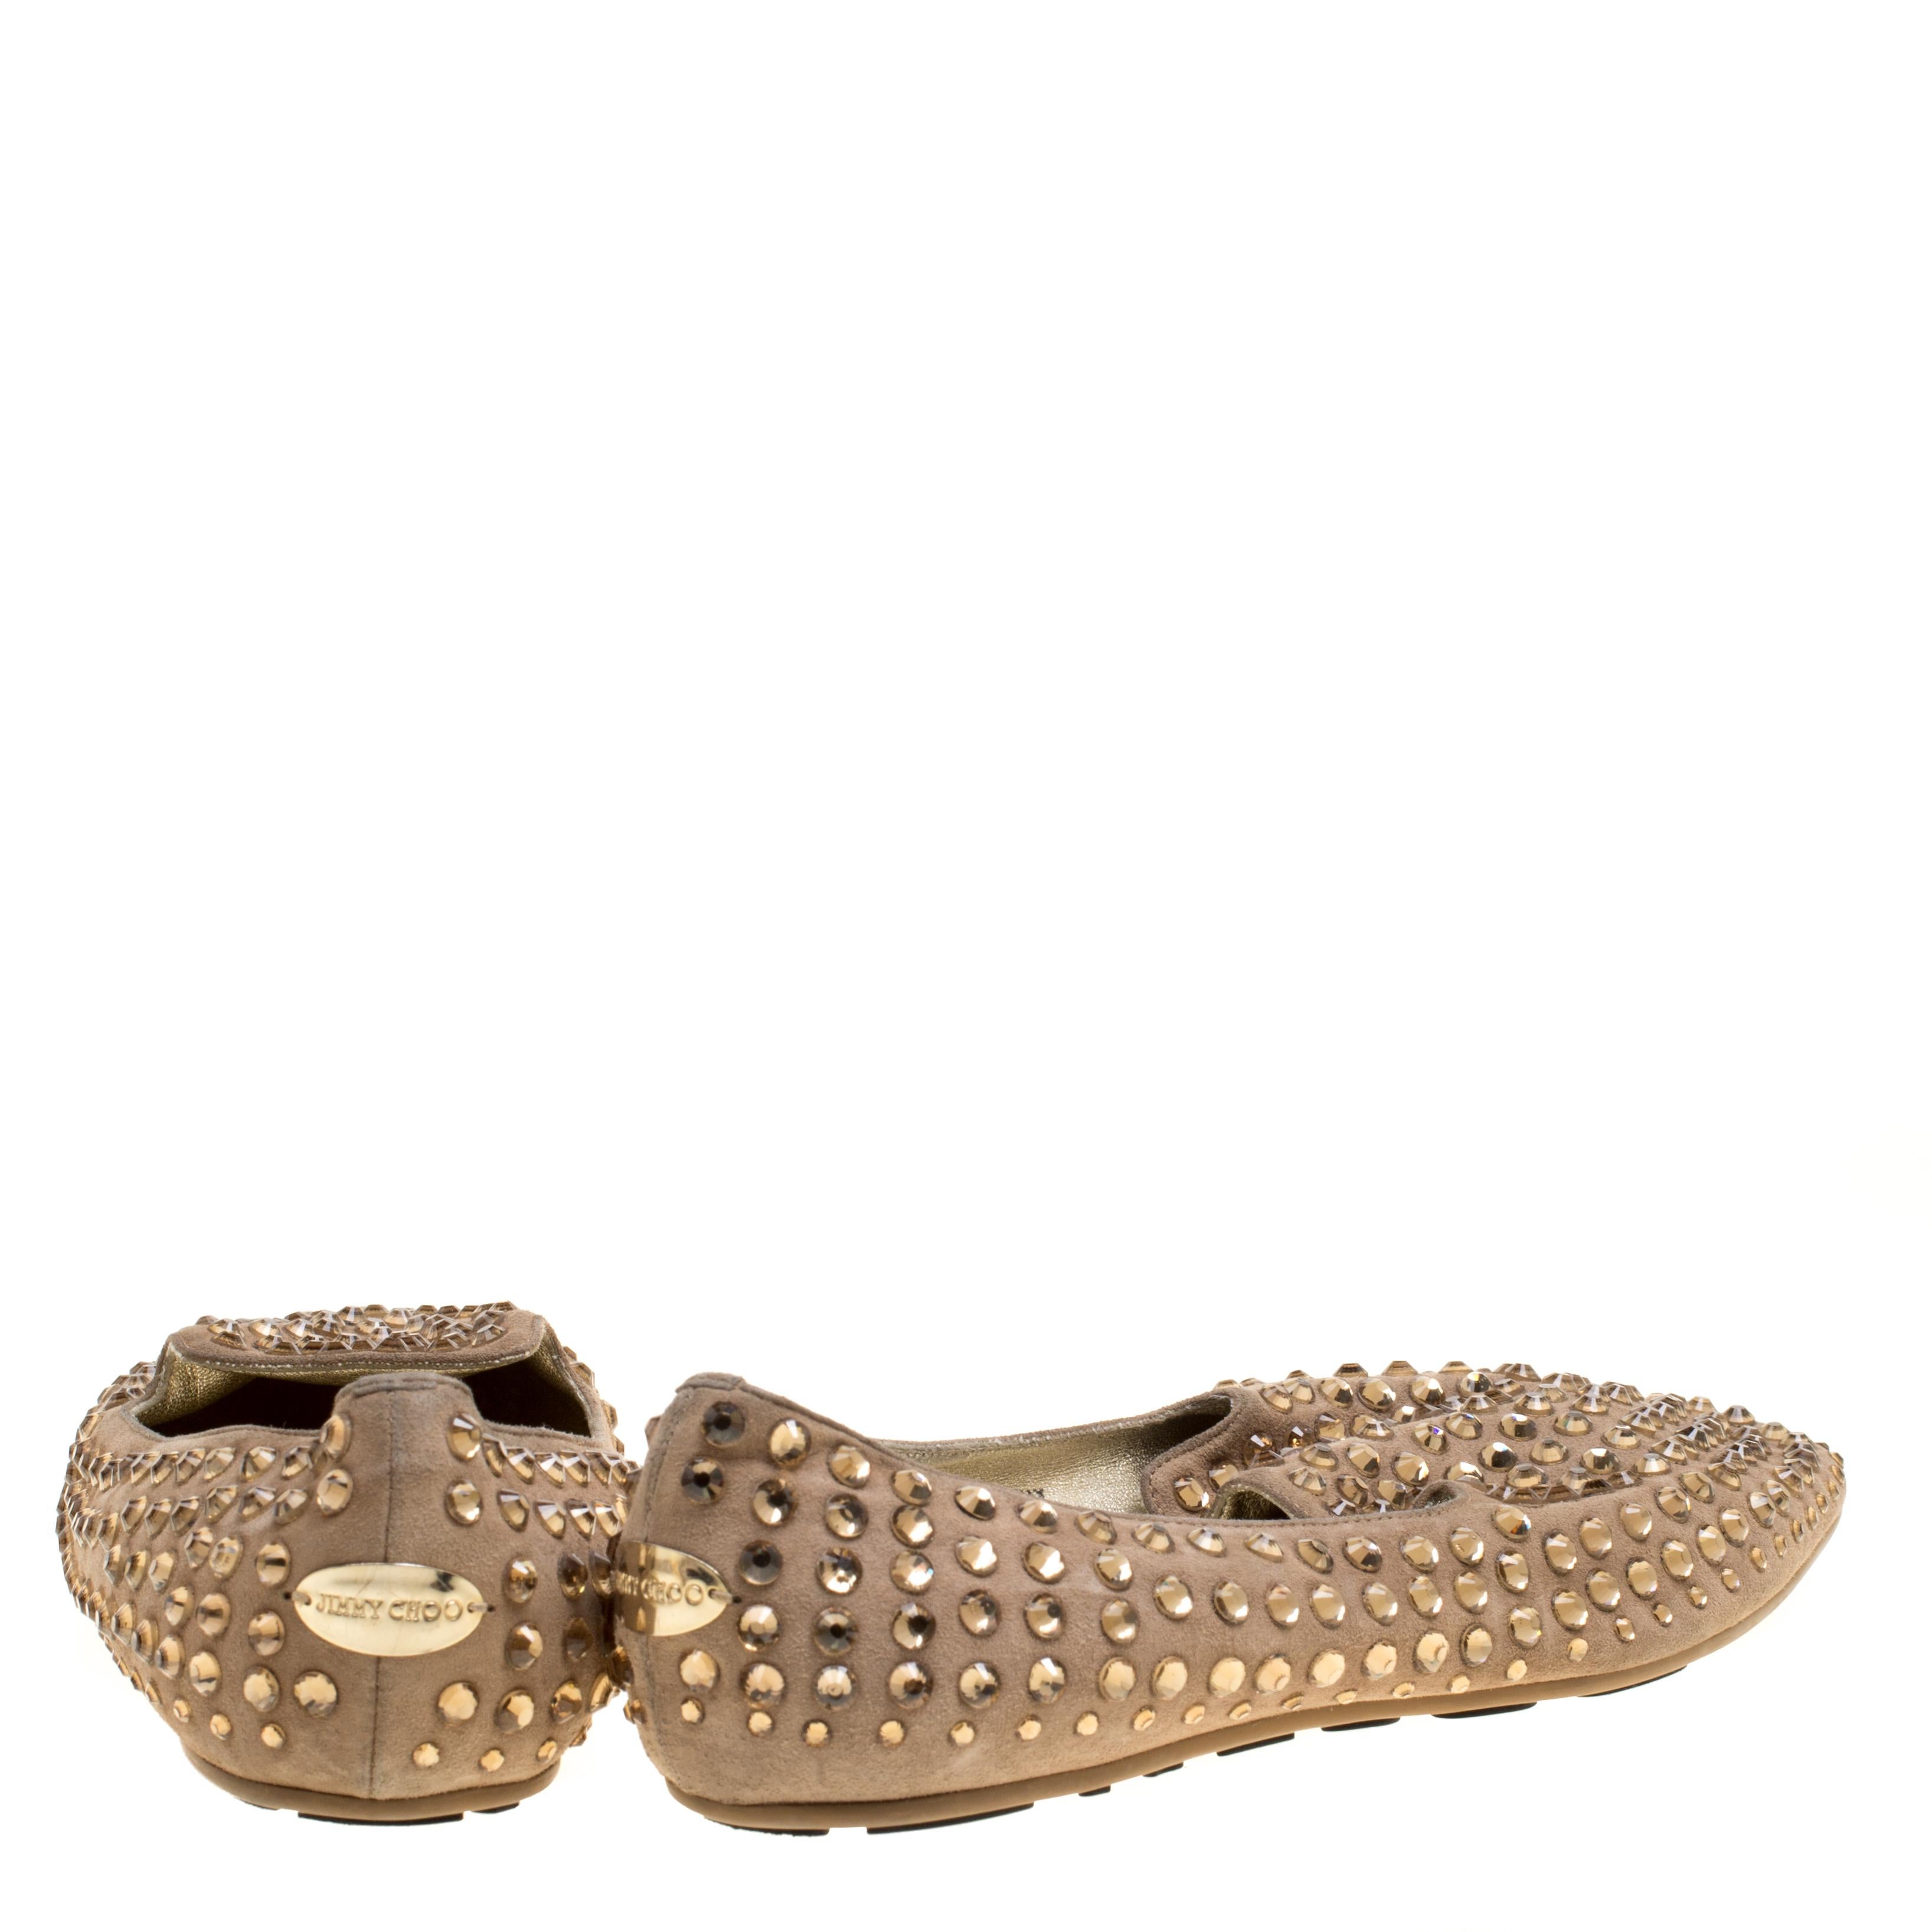 Jimmy Choo Beige Suede Wheel Crystal Studded Smoking Slippers Size 38.5 For Sale 3